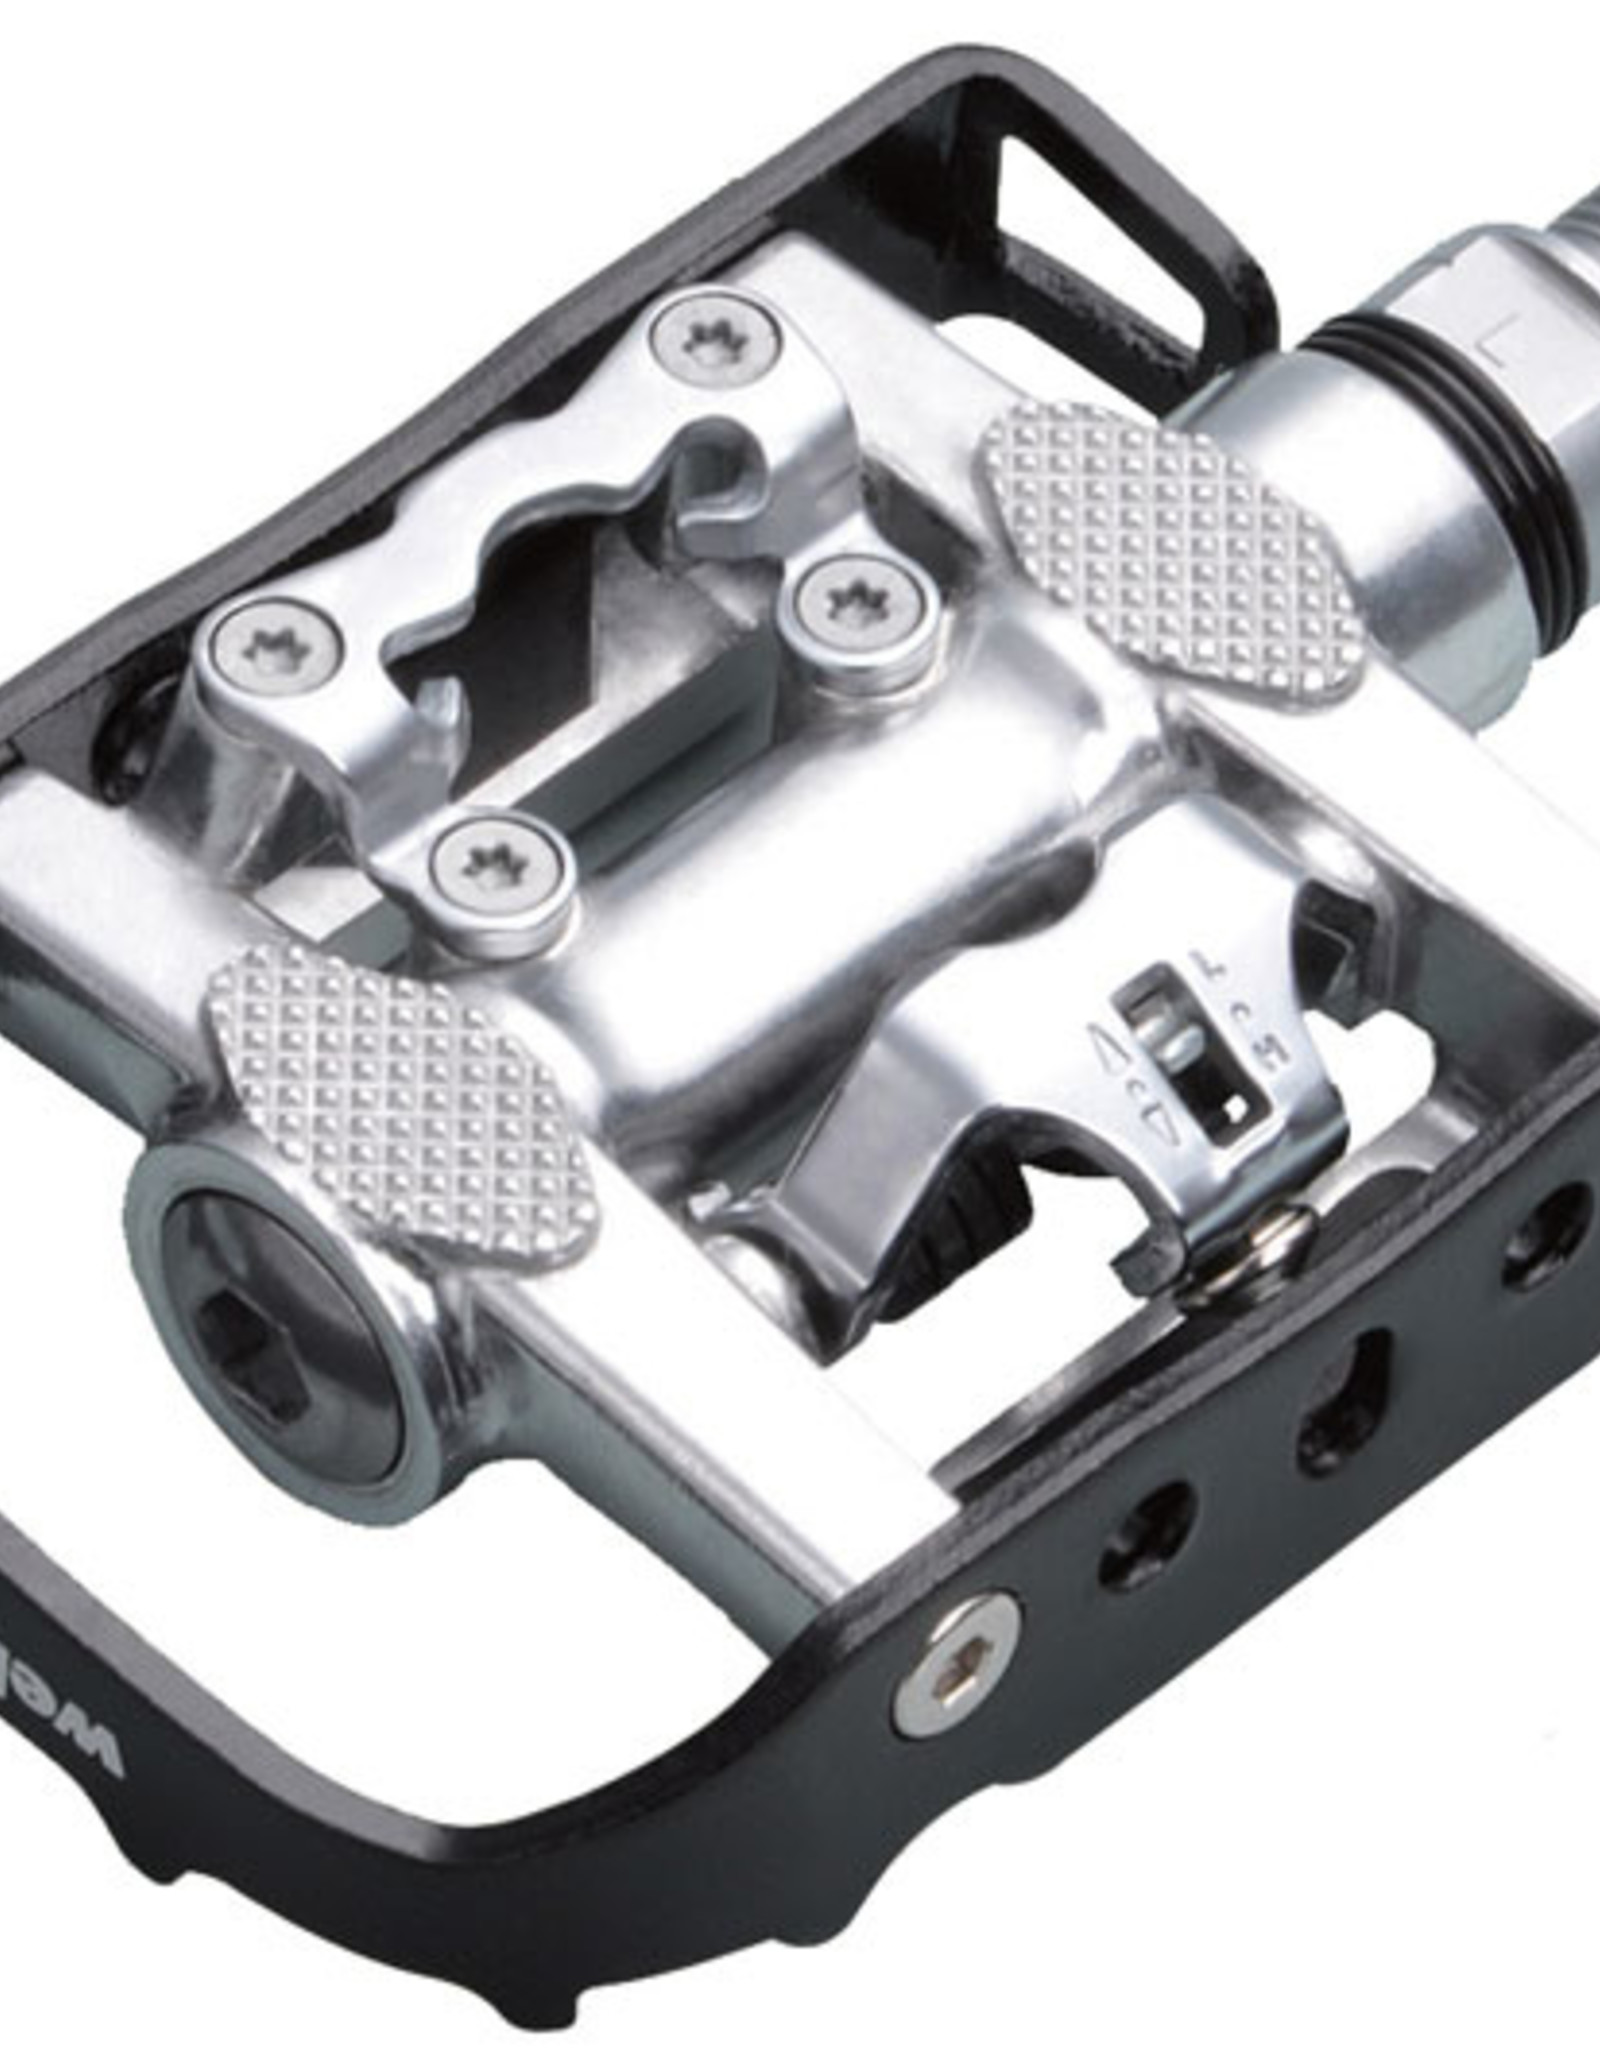 Wellgo C002 Trekking SPD Shimano Cleat Compatible Pedal with Ball Bearing